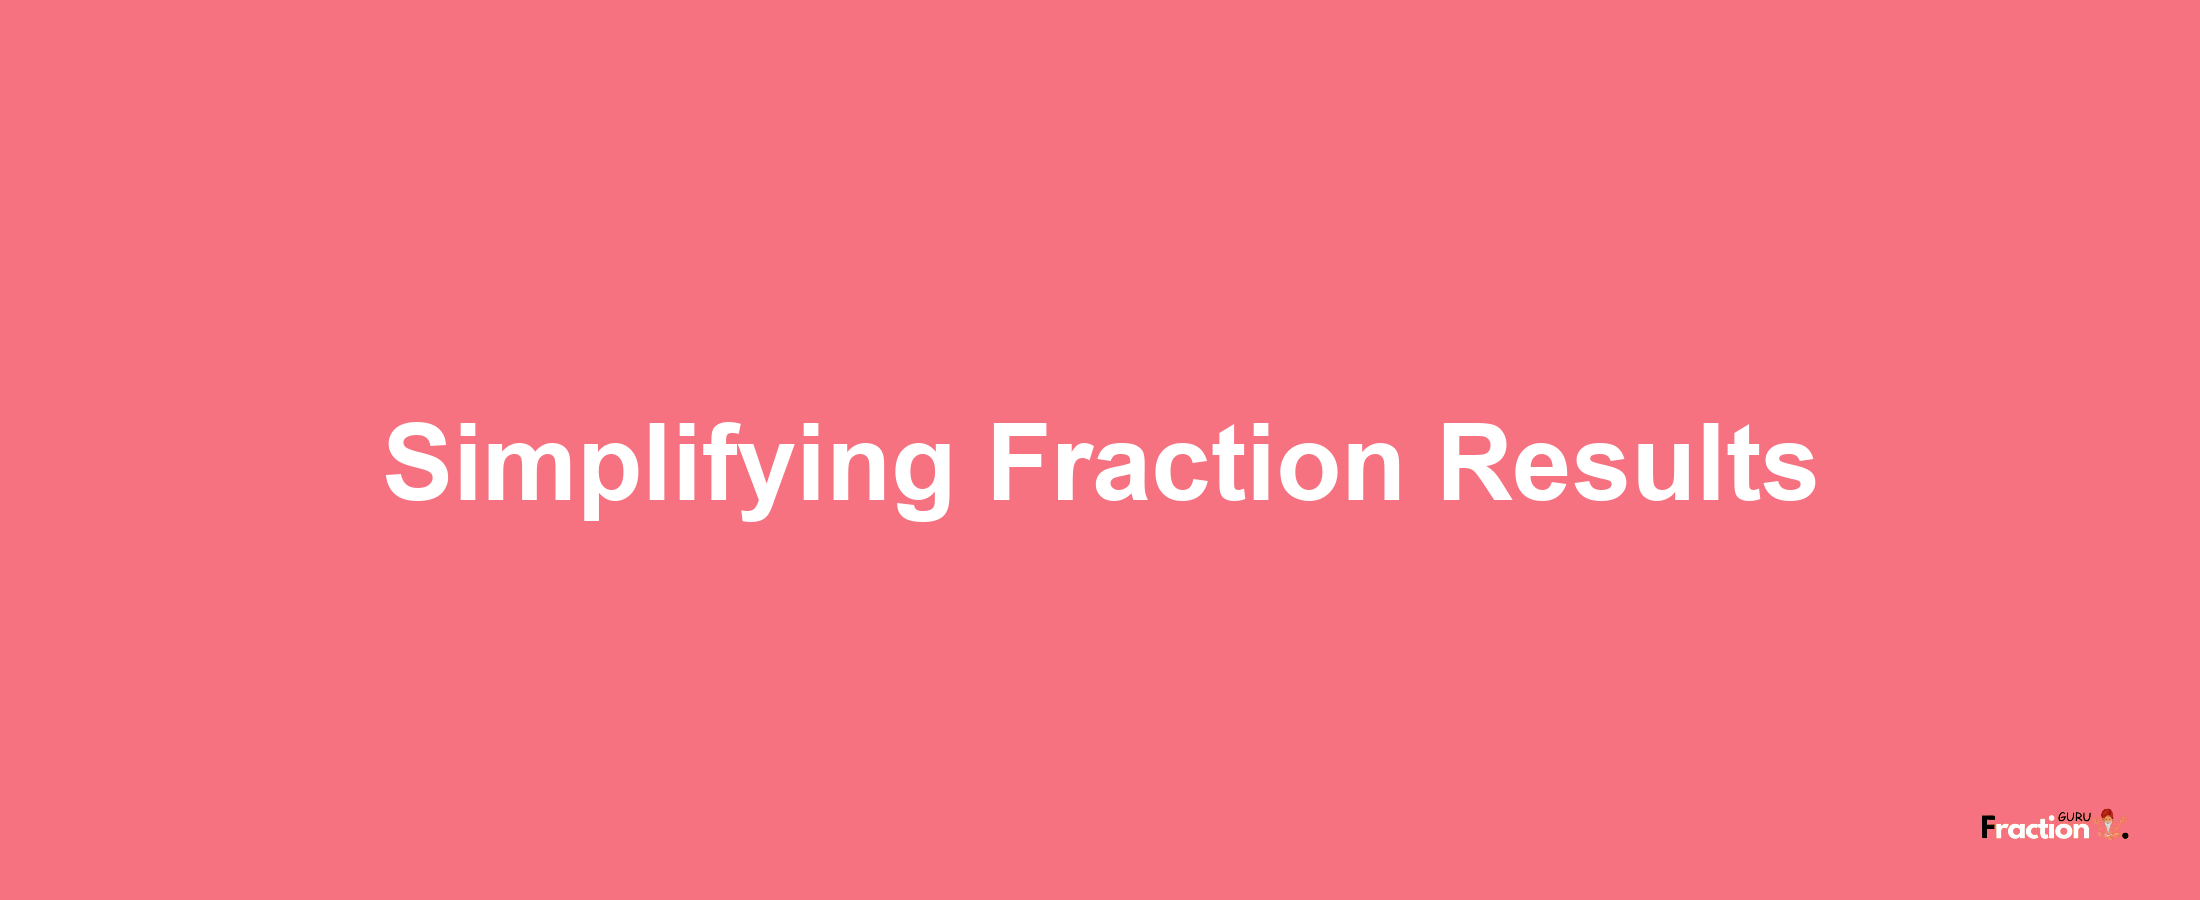 Simplifying Fraction Results